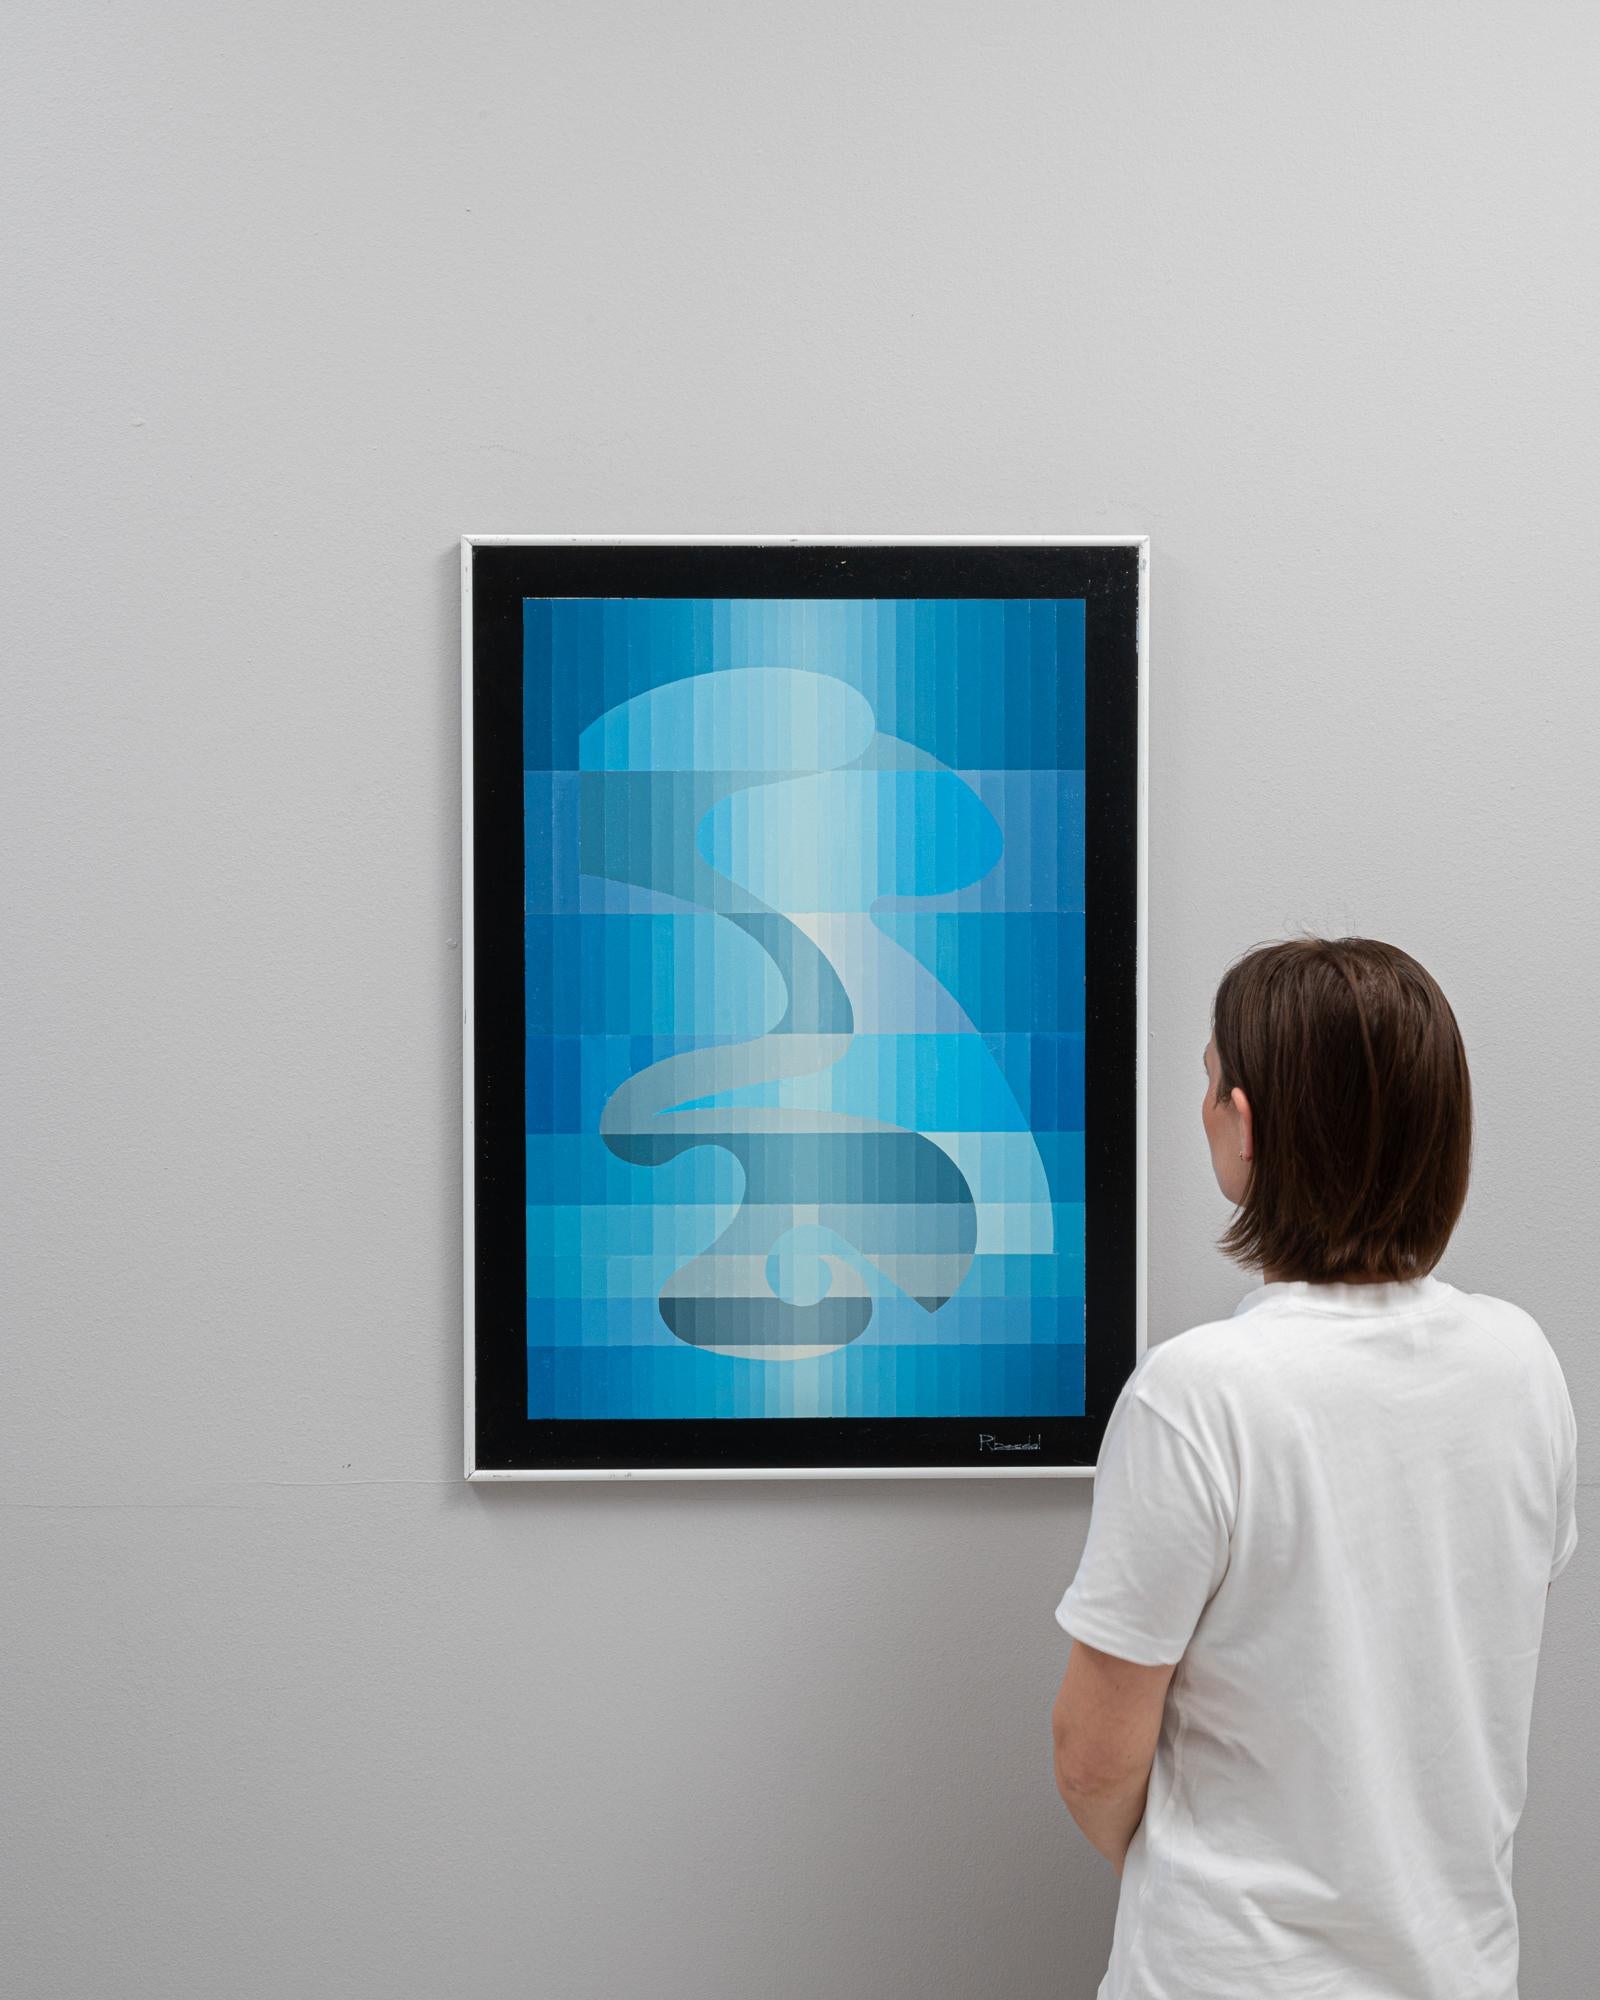 This 20th Century Belgian artwork by René Berdal, framed in metal, showcases a sophisticated interplay of fluid shapes and shades of blue, creating a mesmerizing visual experience. The artwork features an abstract design where sinuous forms seem to